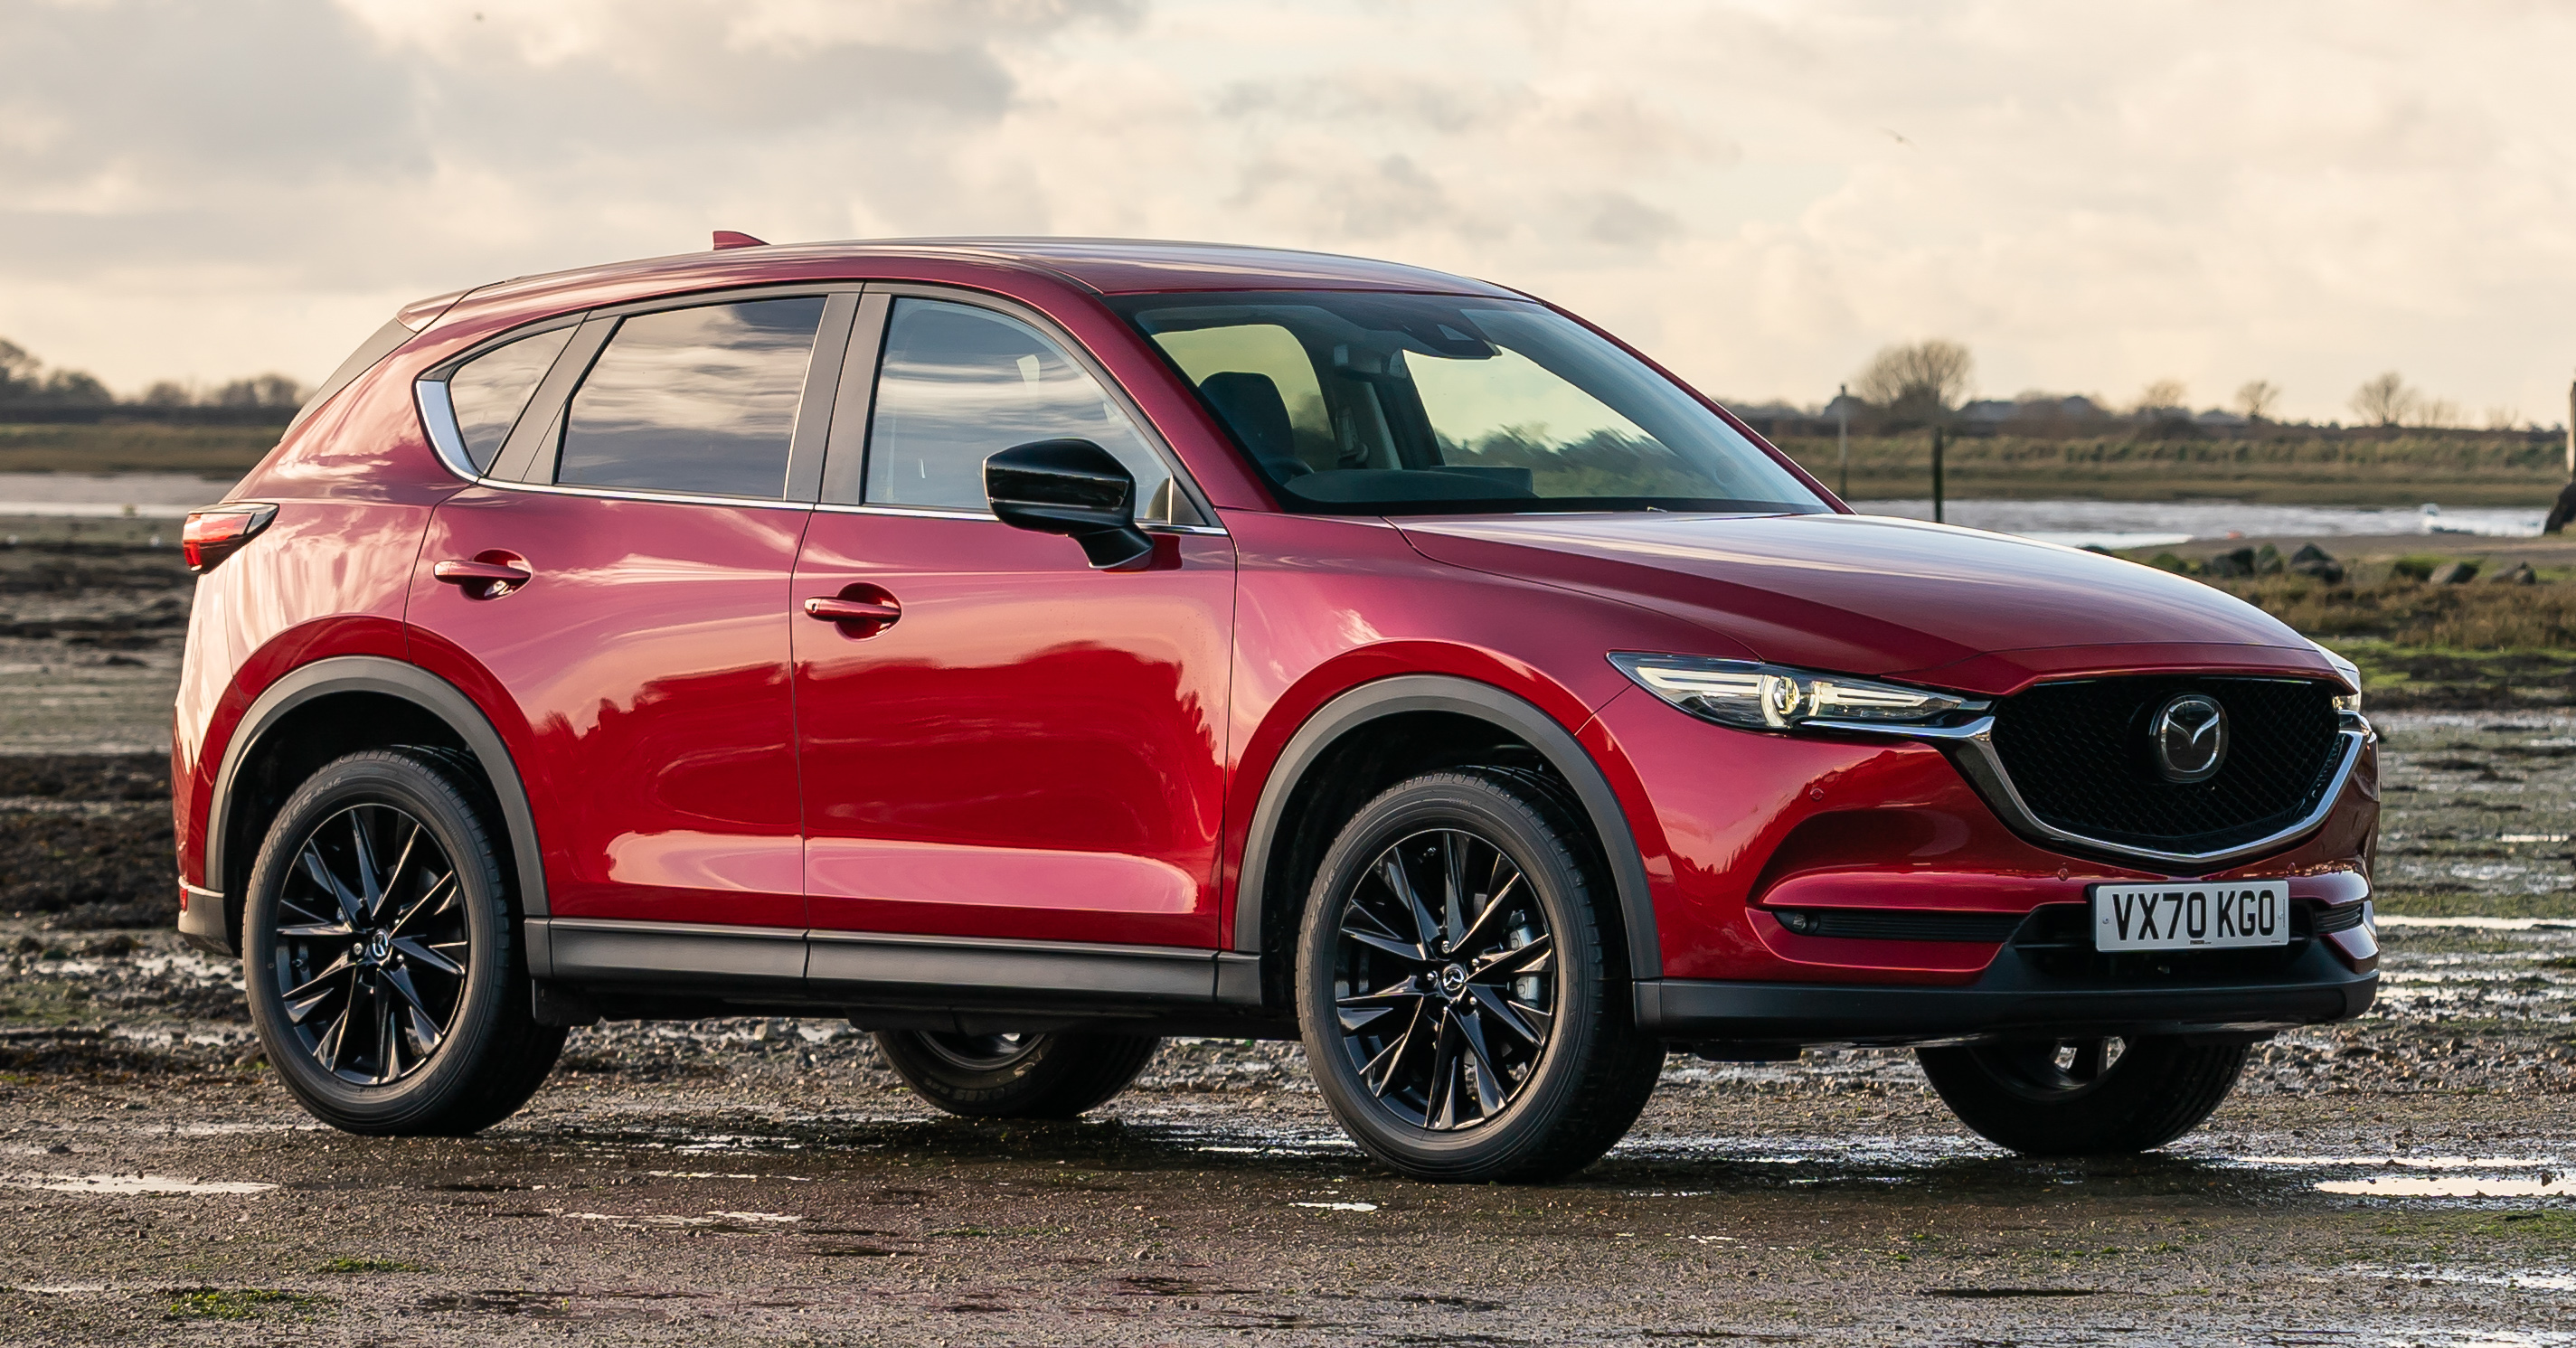 Mazda confirms next-gen CX-5 as its first model to RWD engines - 2022 launch? -